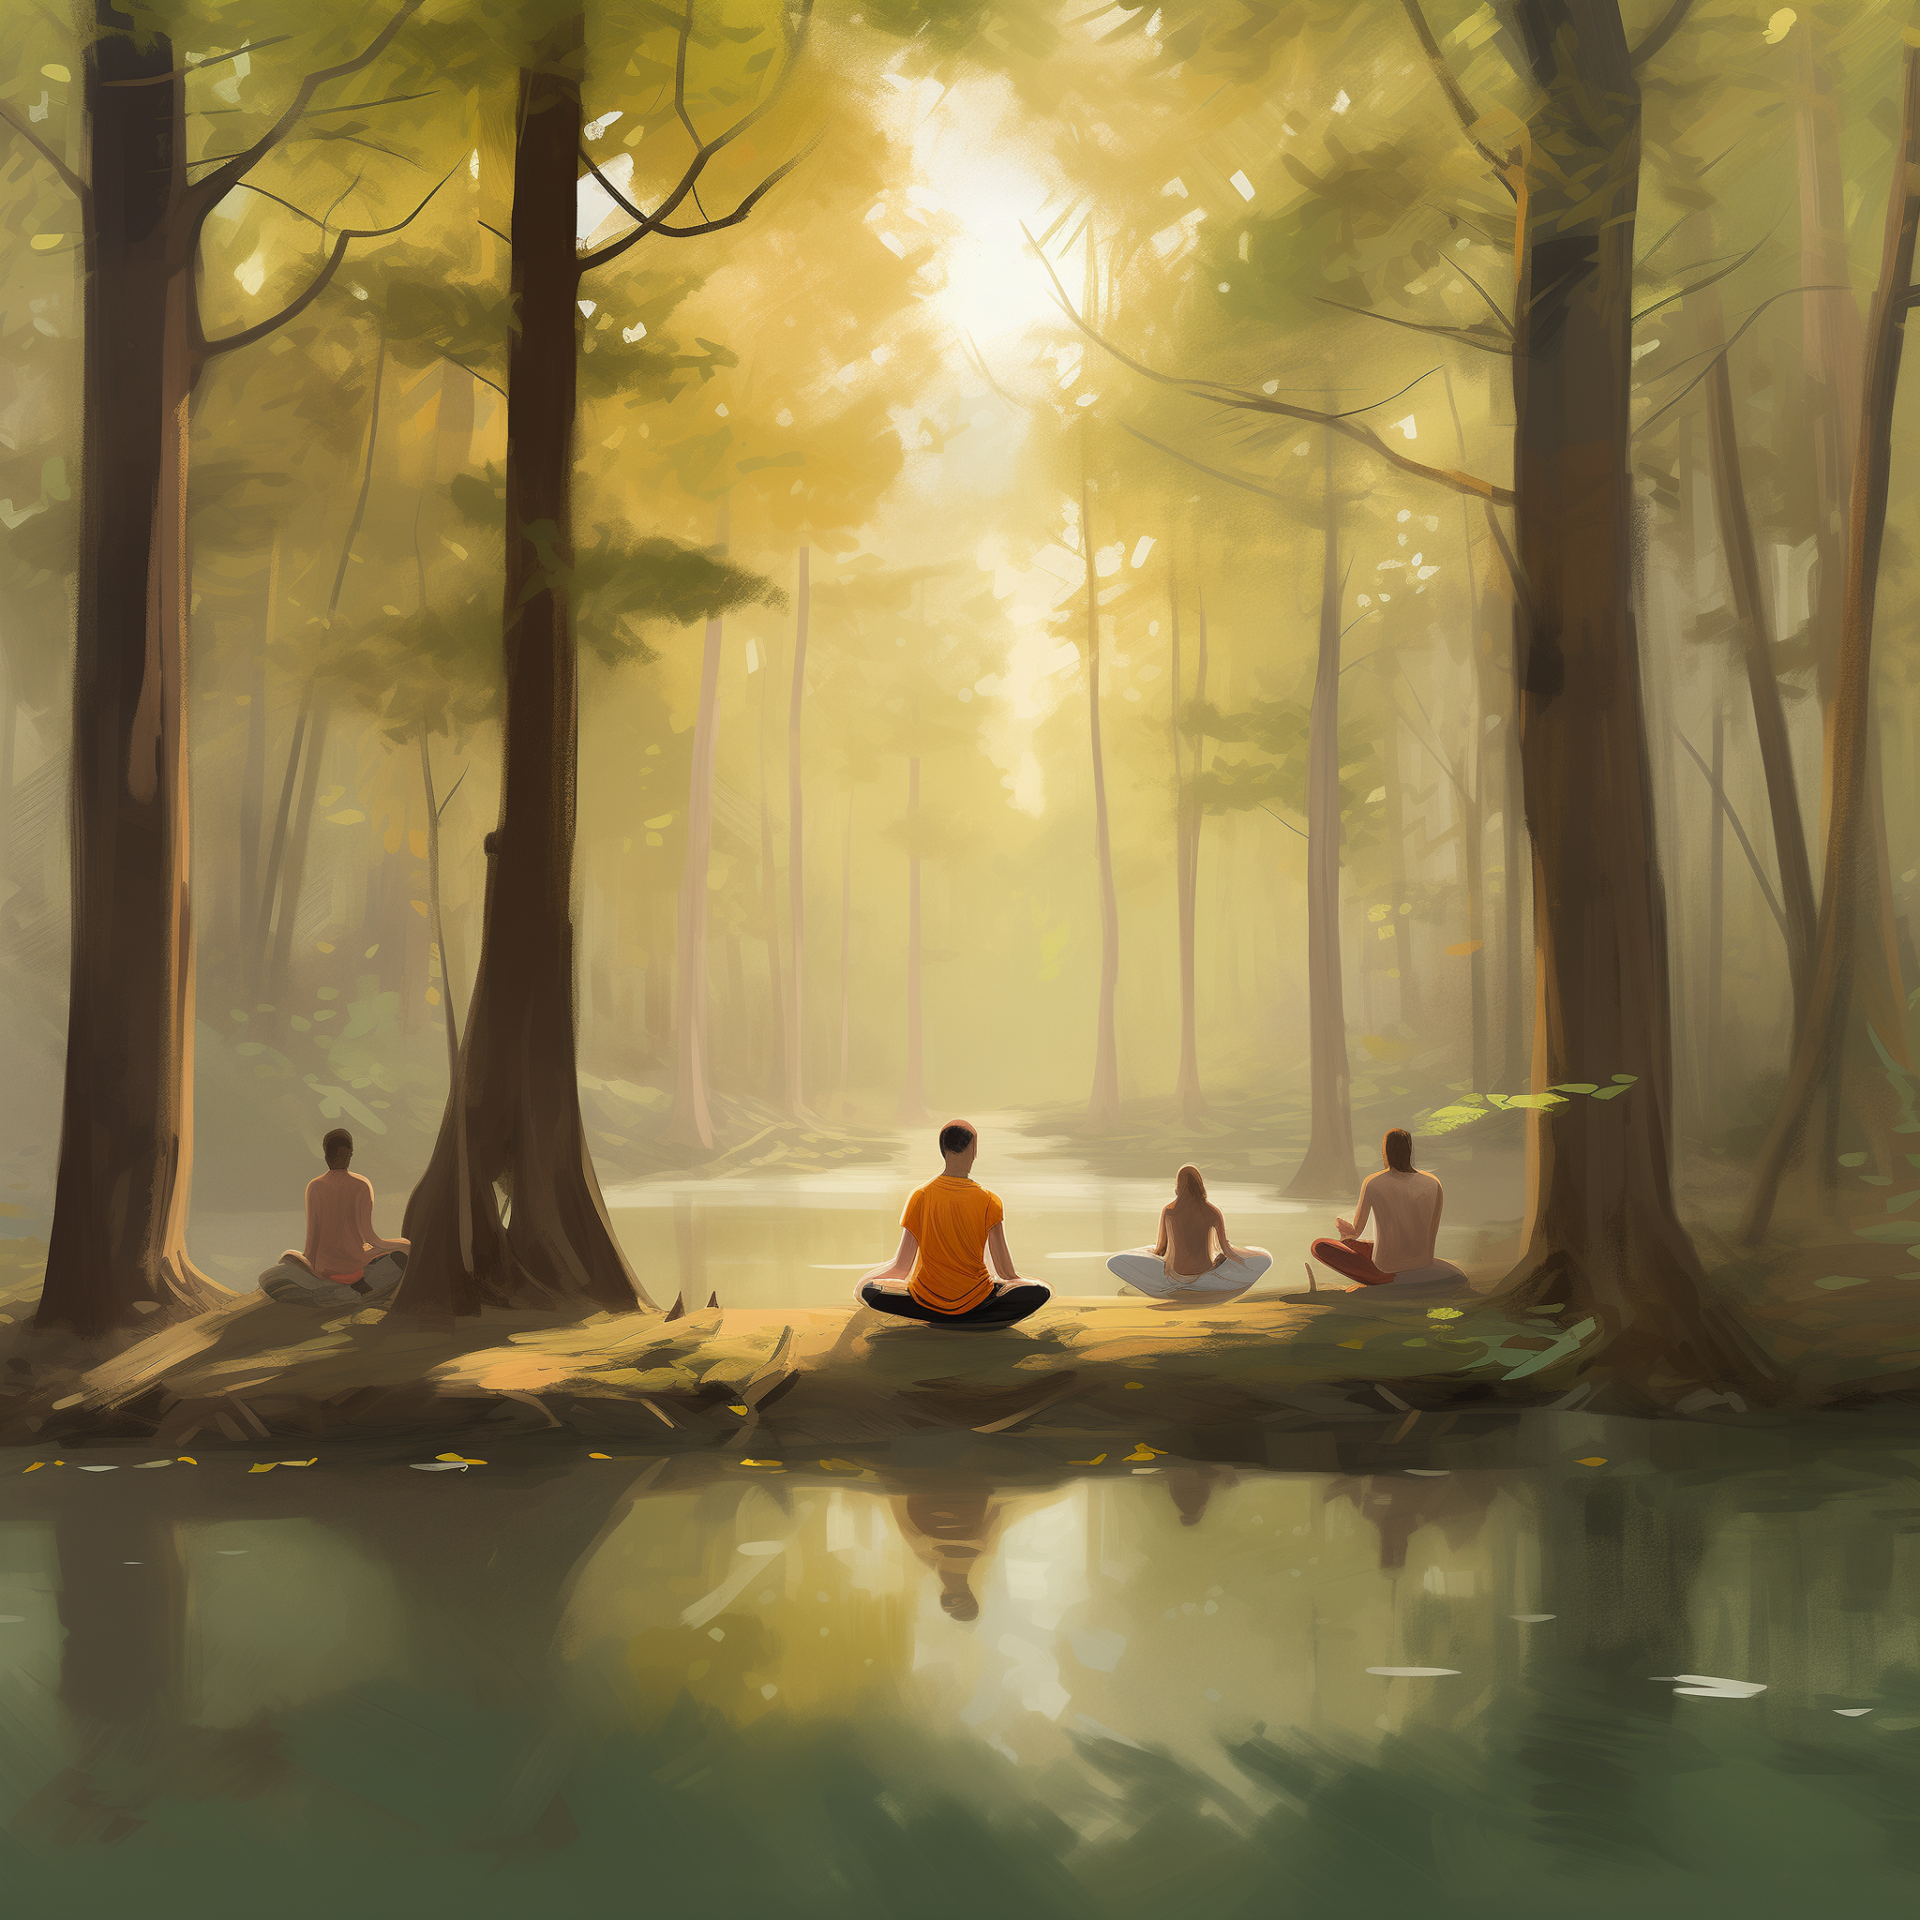 Individuals immersed in the serene embrace of nature, practicing yoga amidst the whispering trees, The air is filled with the scent of pine and the soft murmur of a nearby stream. Each person is in a state of deep tranquility, their movements slow and deliberate as they transition from one pose to another. The forest around them is alive with the golden light of dawn, casting long, peaceful shadows